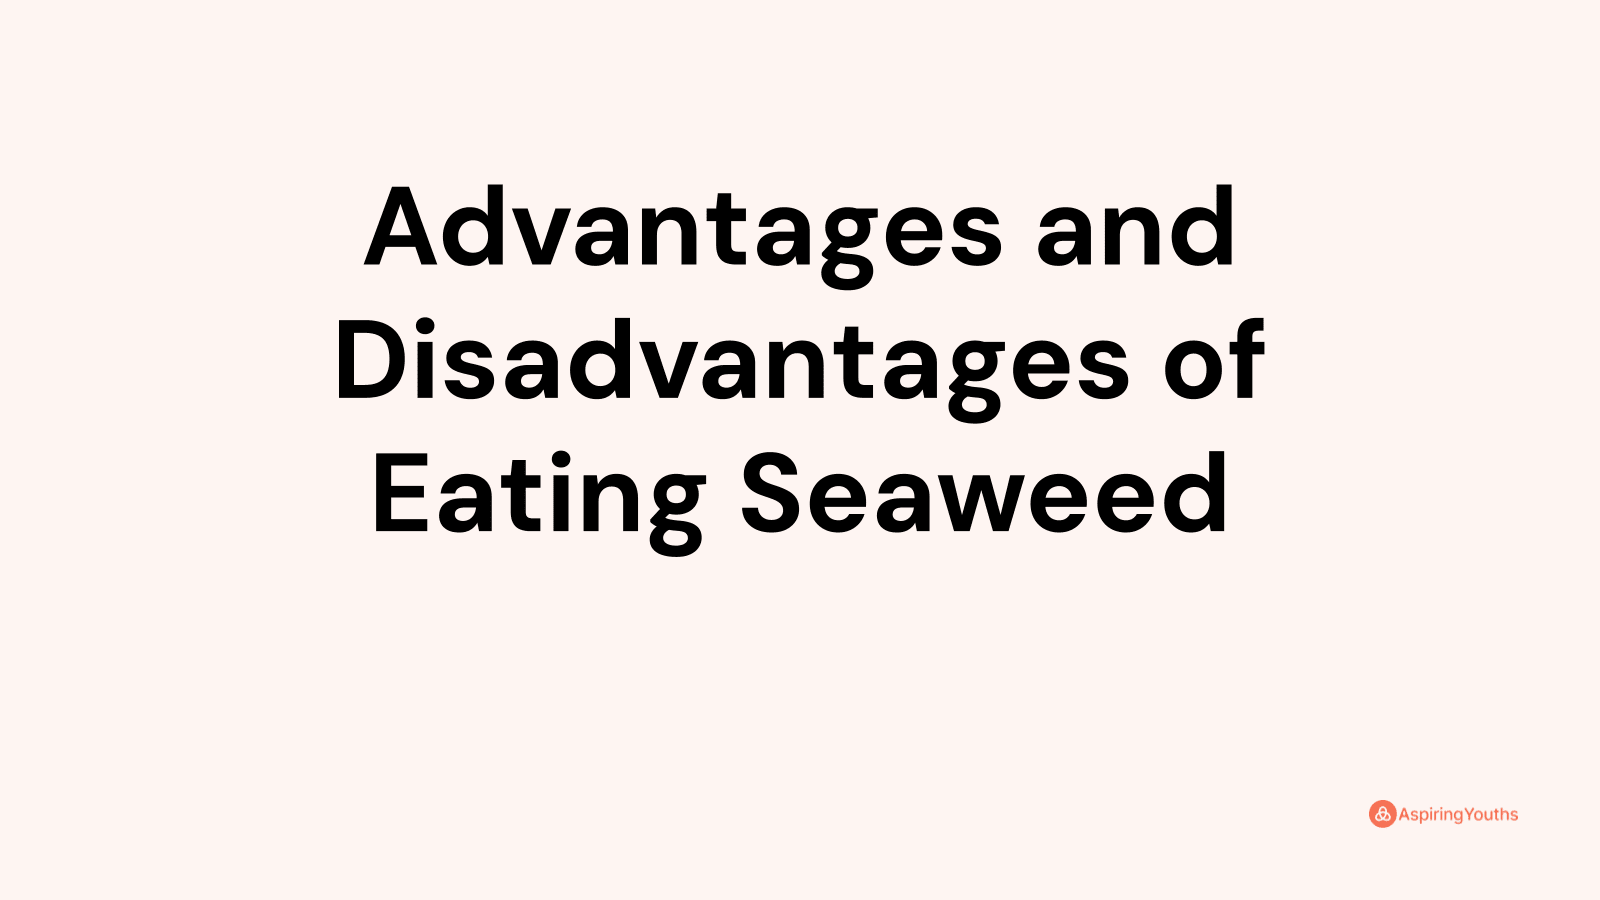 Advantages and disadvantages of Eating Seaweed